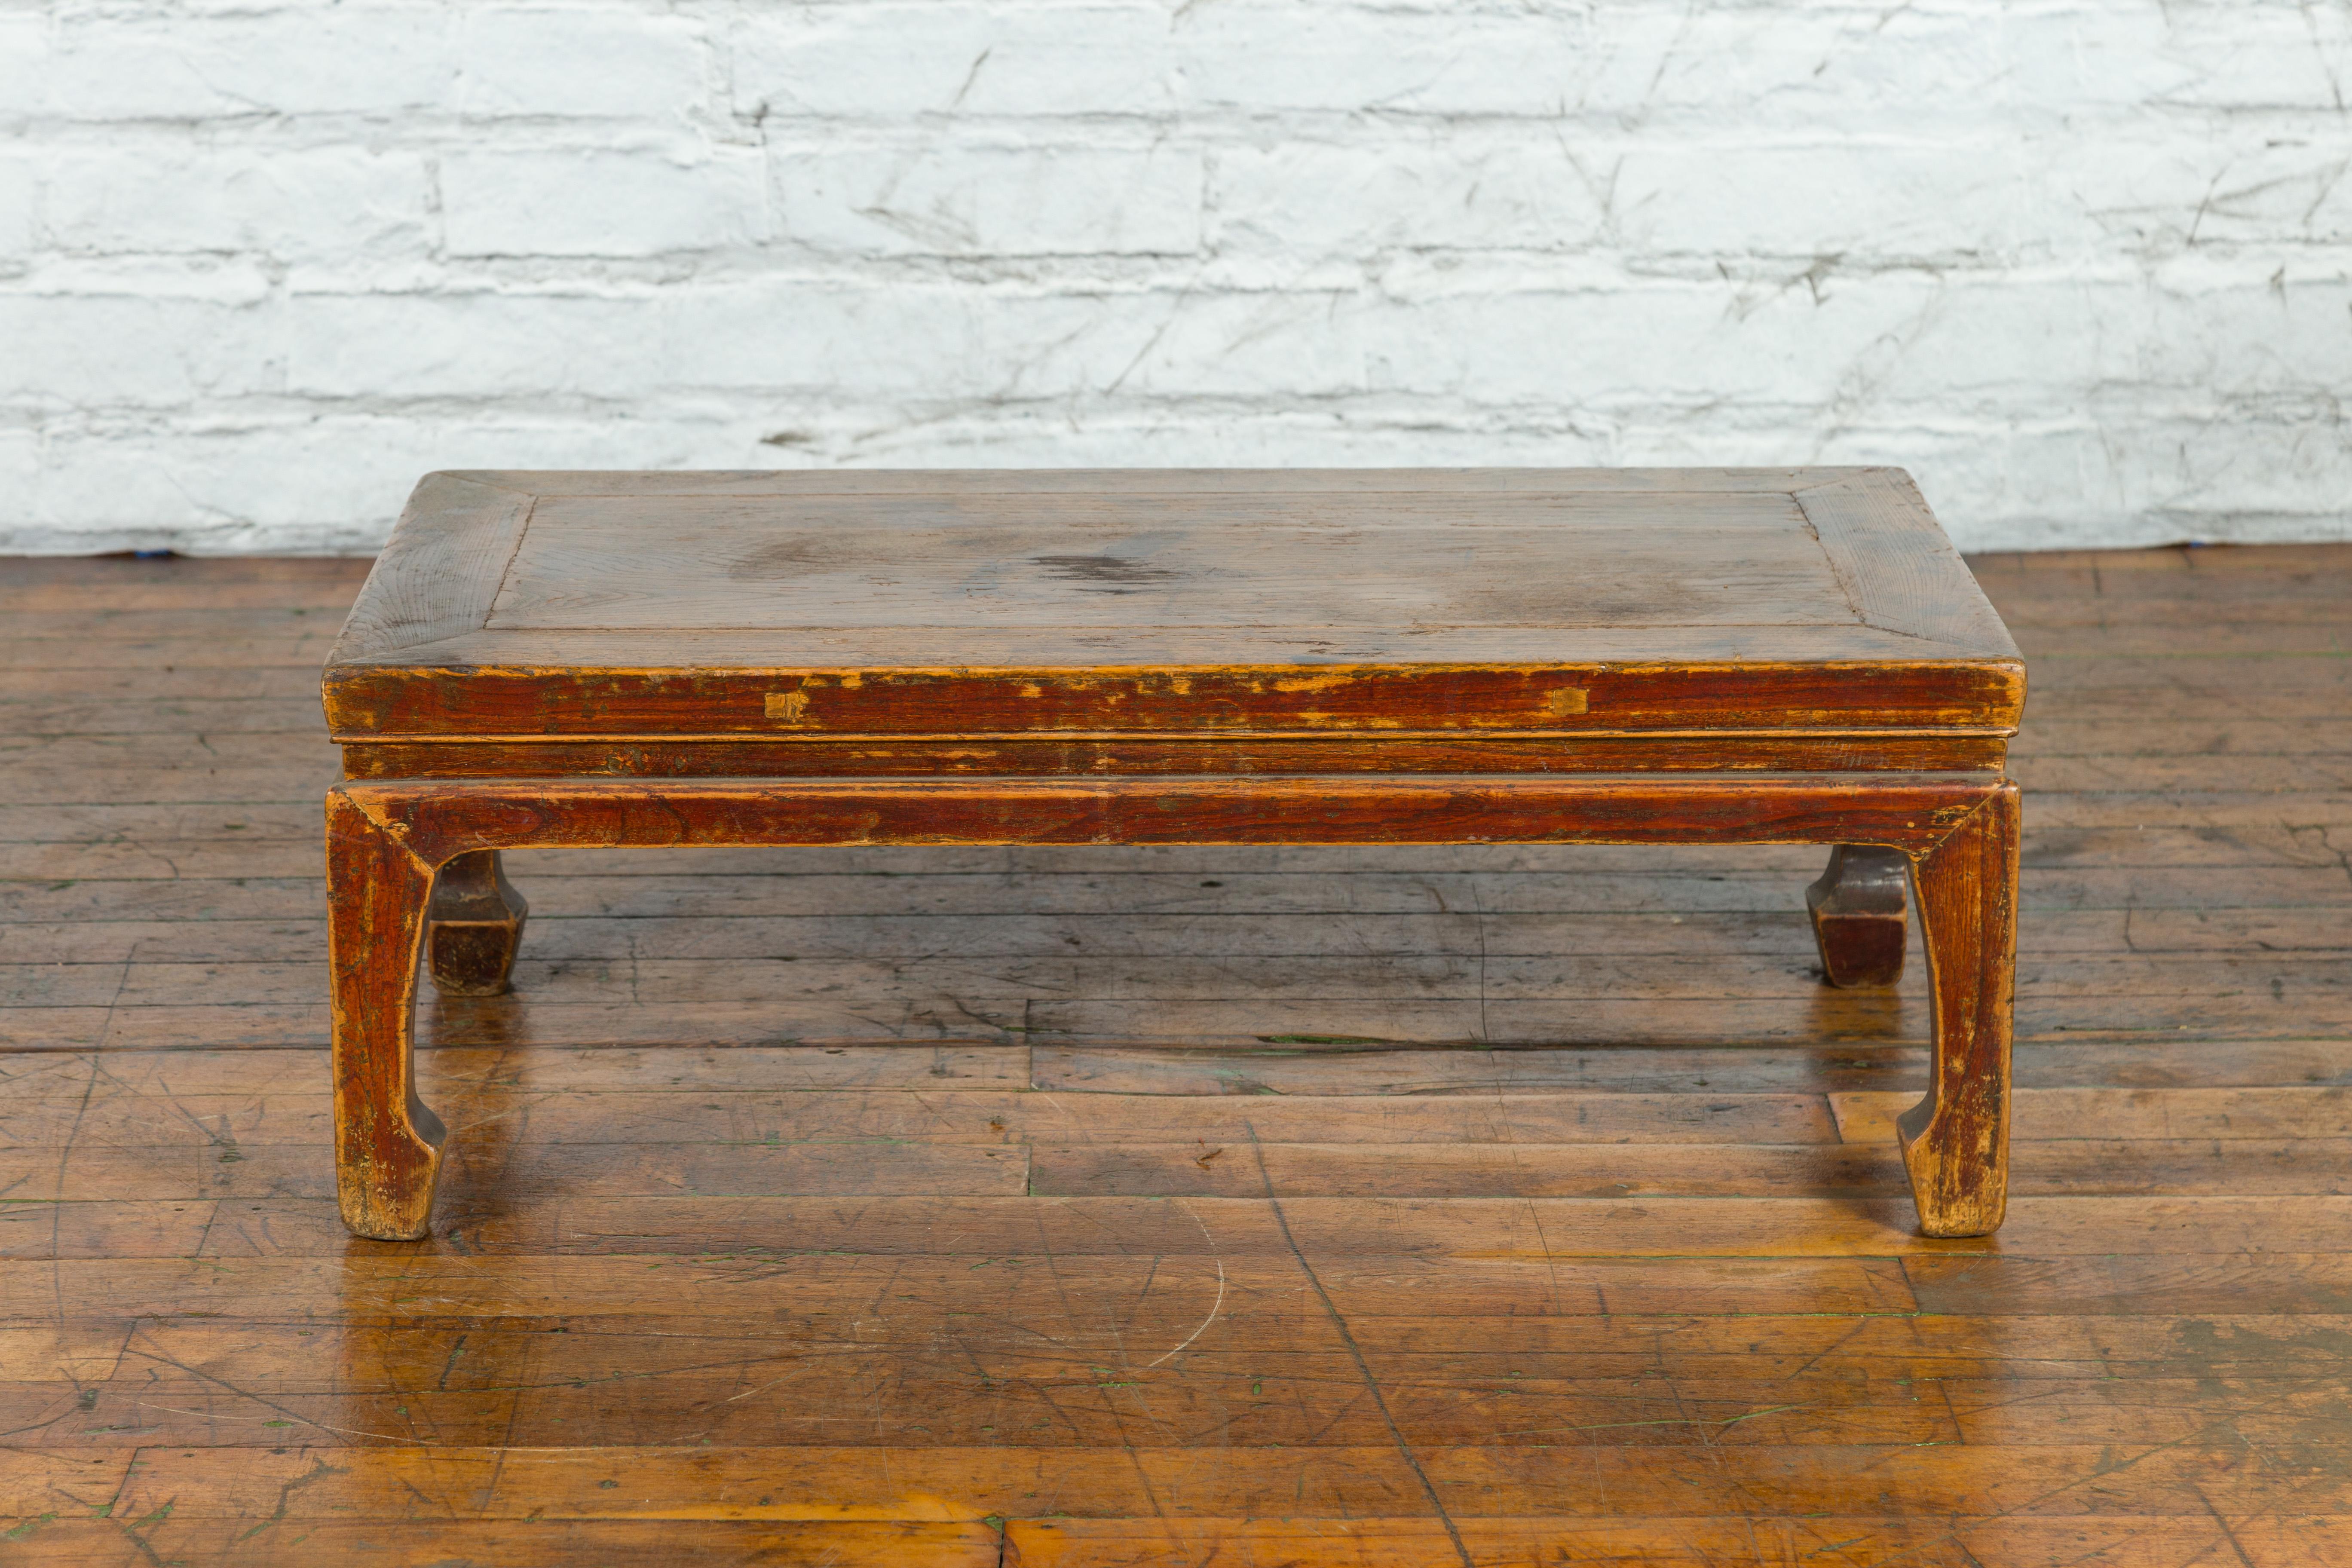 Chinese Qing Dynasty 19th Century Low Coffee Table with Distressed Patina For Sale 7